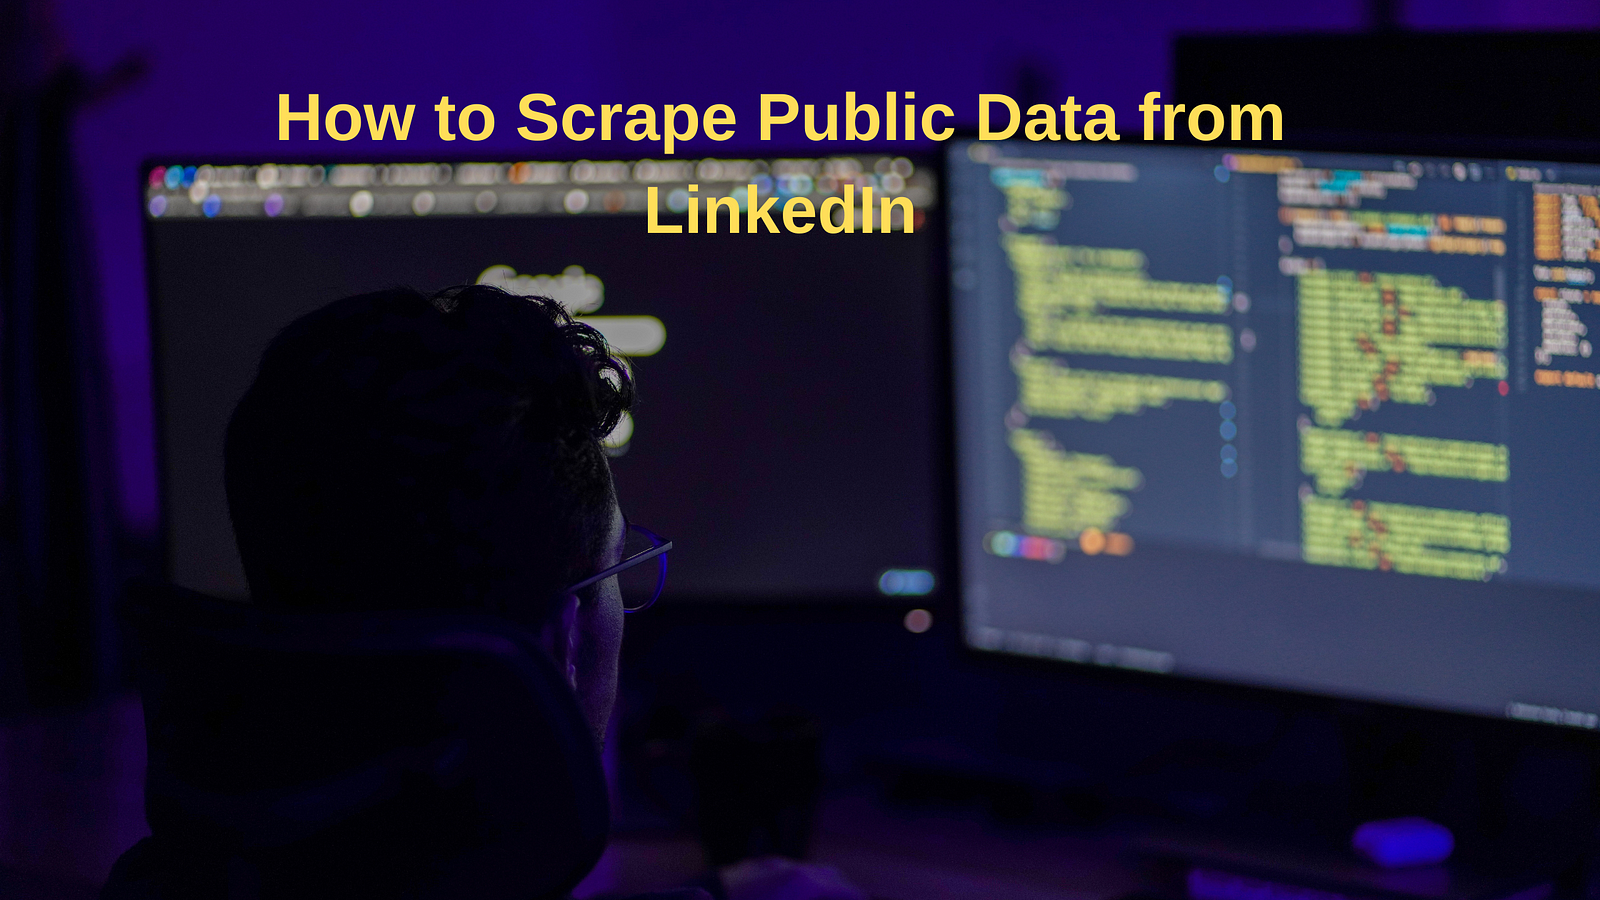 How to Scrape Public Data from LinkedIn